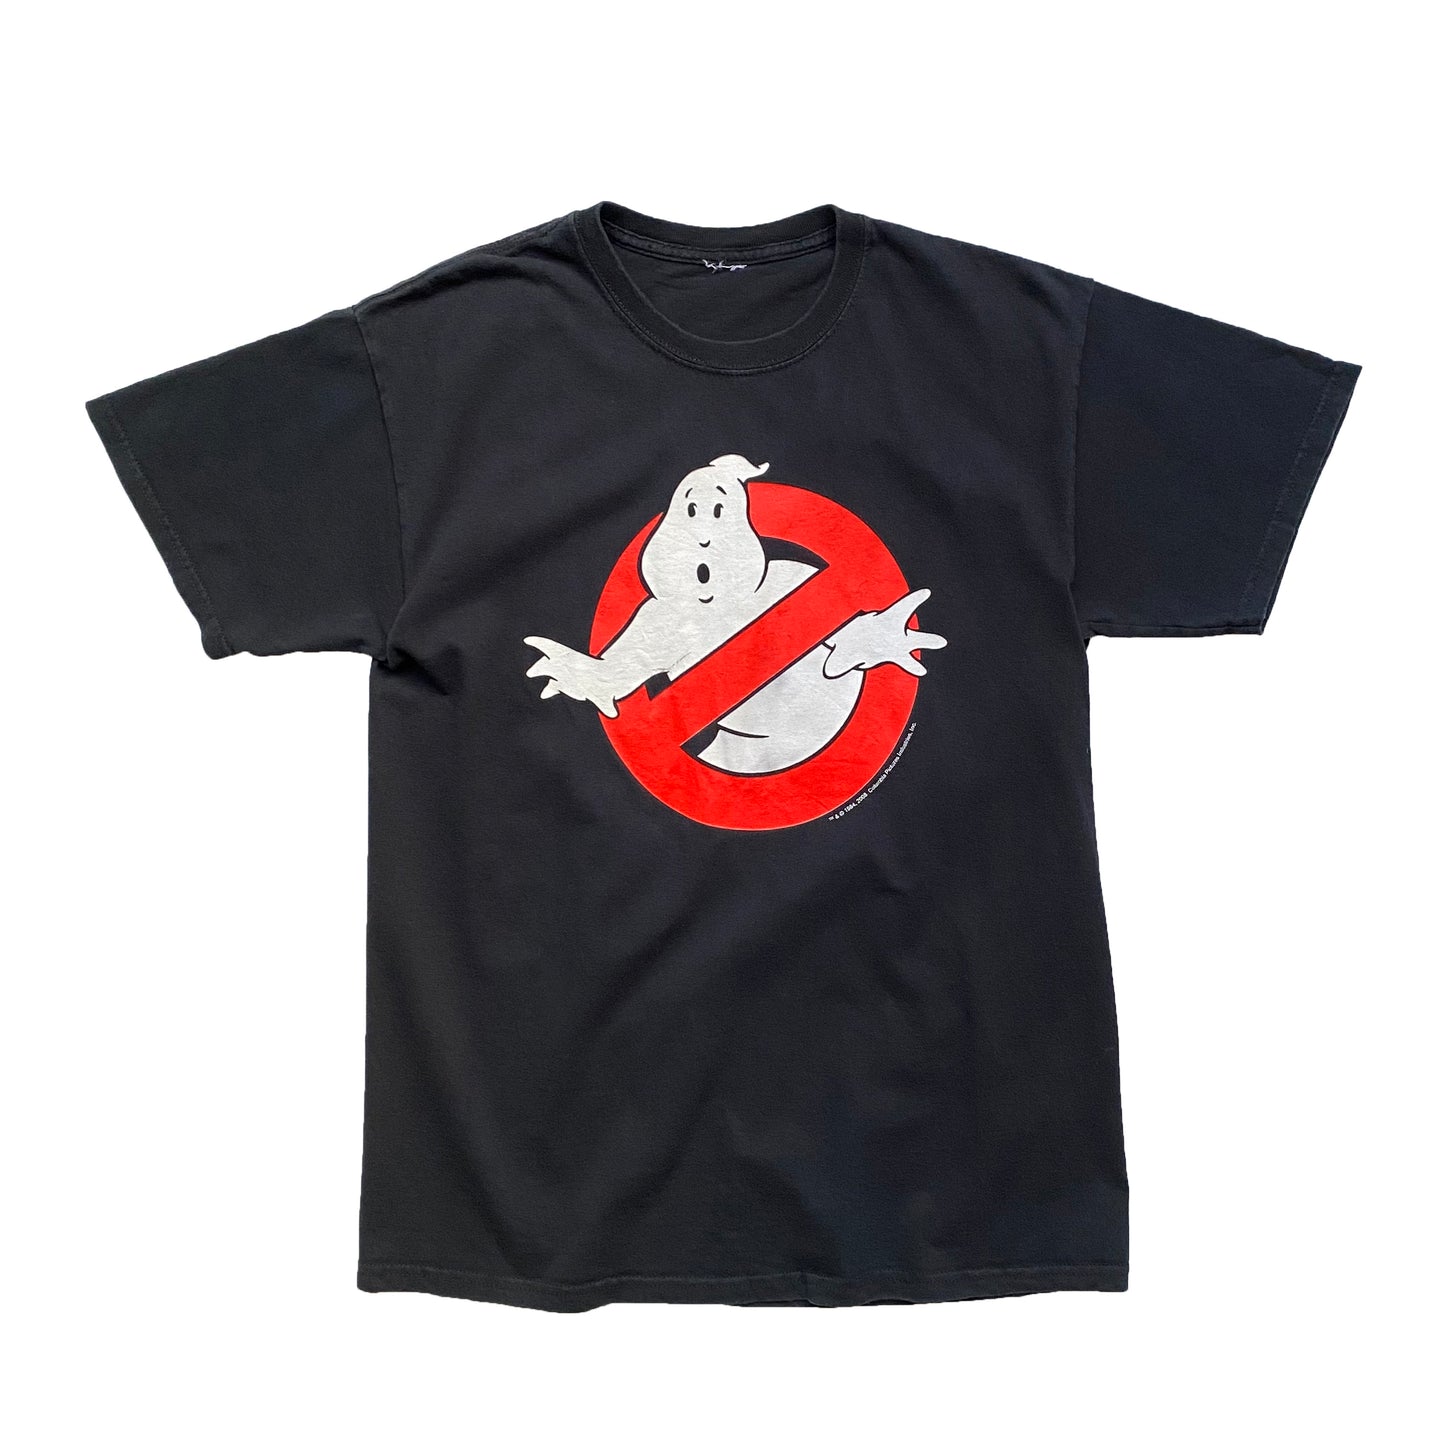 00's GHOST BUSTERS T-SHIRT